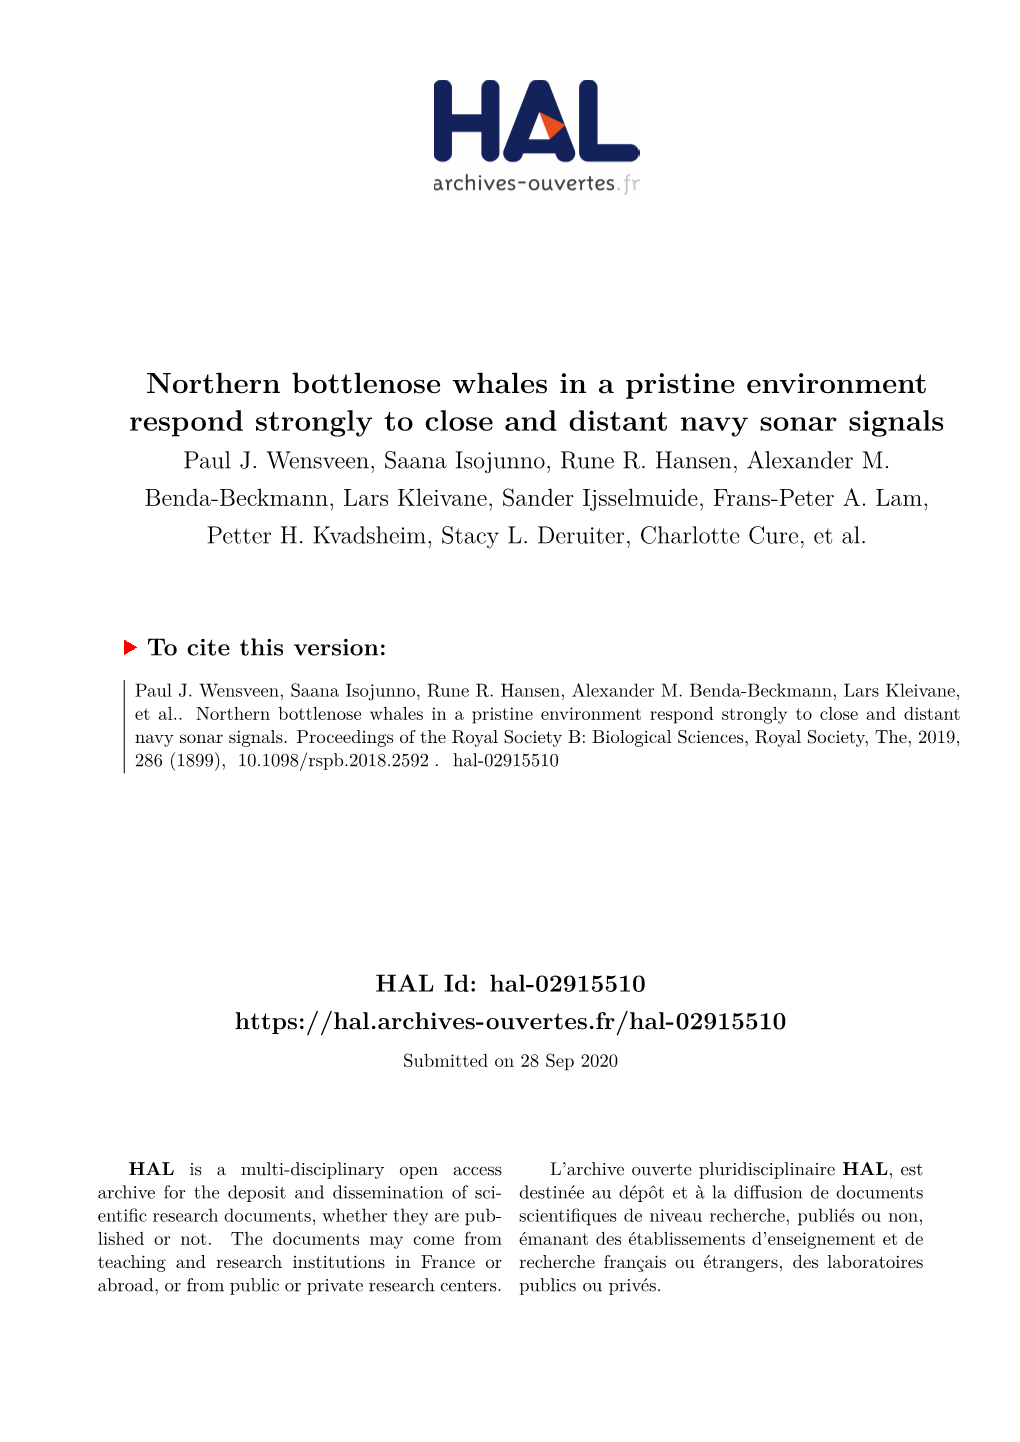 Northern Bottlenose Whales in a Pristine Environment Respond Strongly to Close and Distant Navy Sonar Signals Paul J